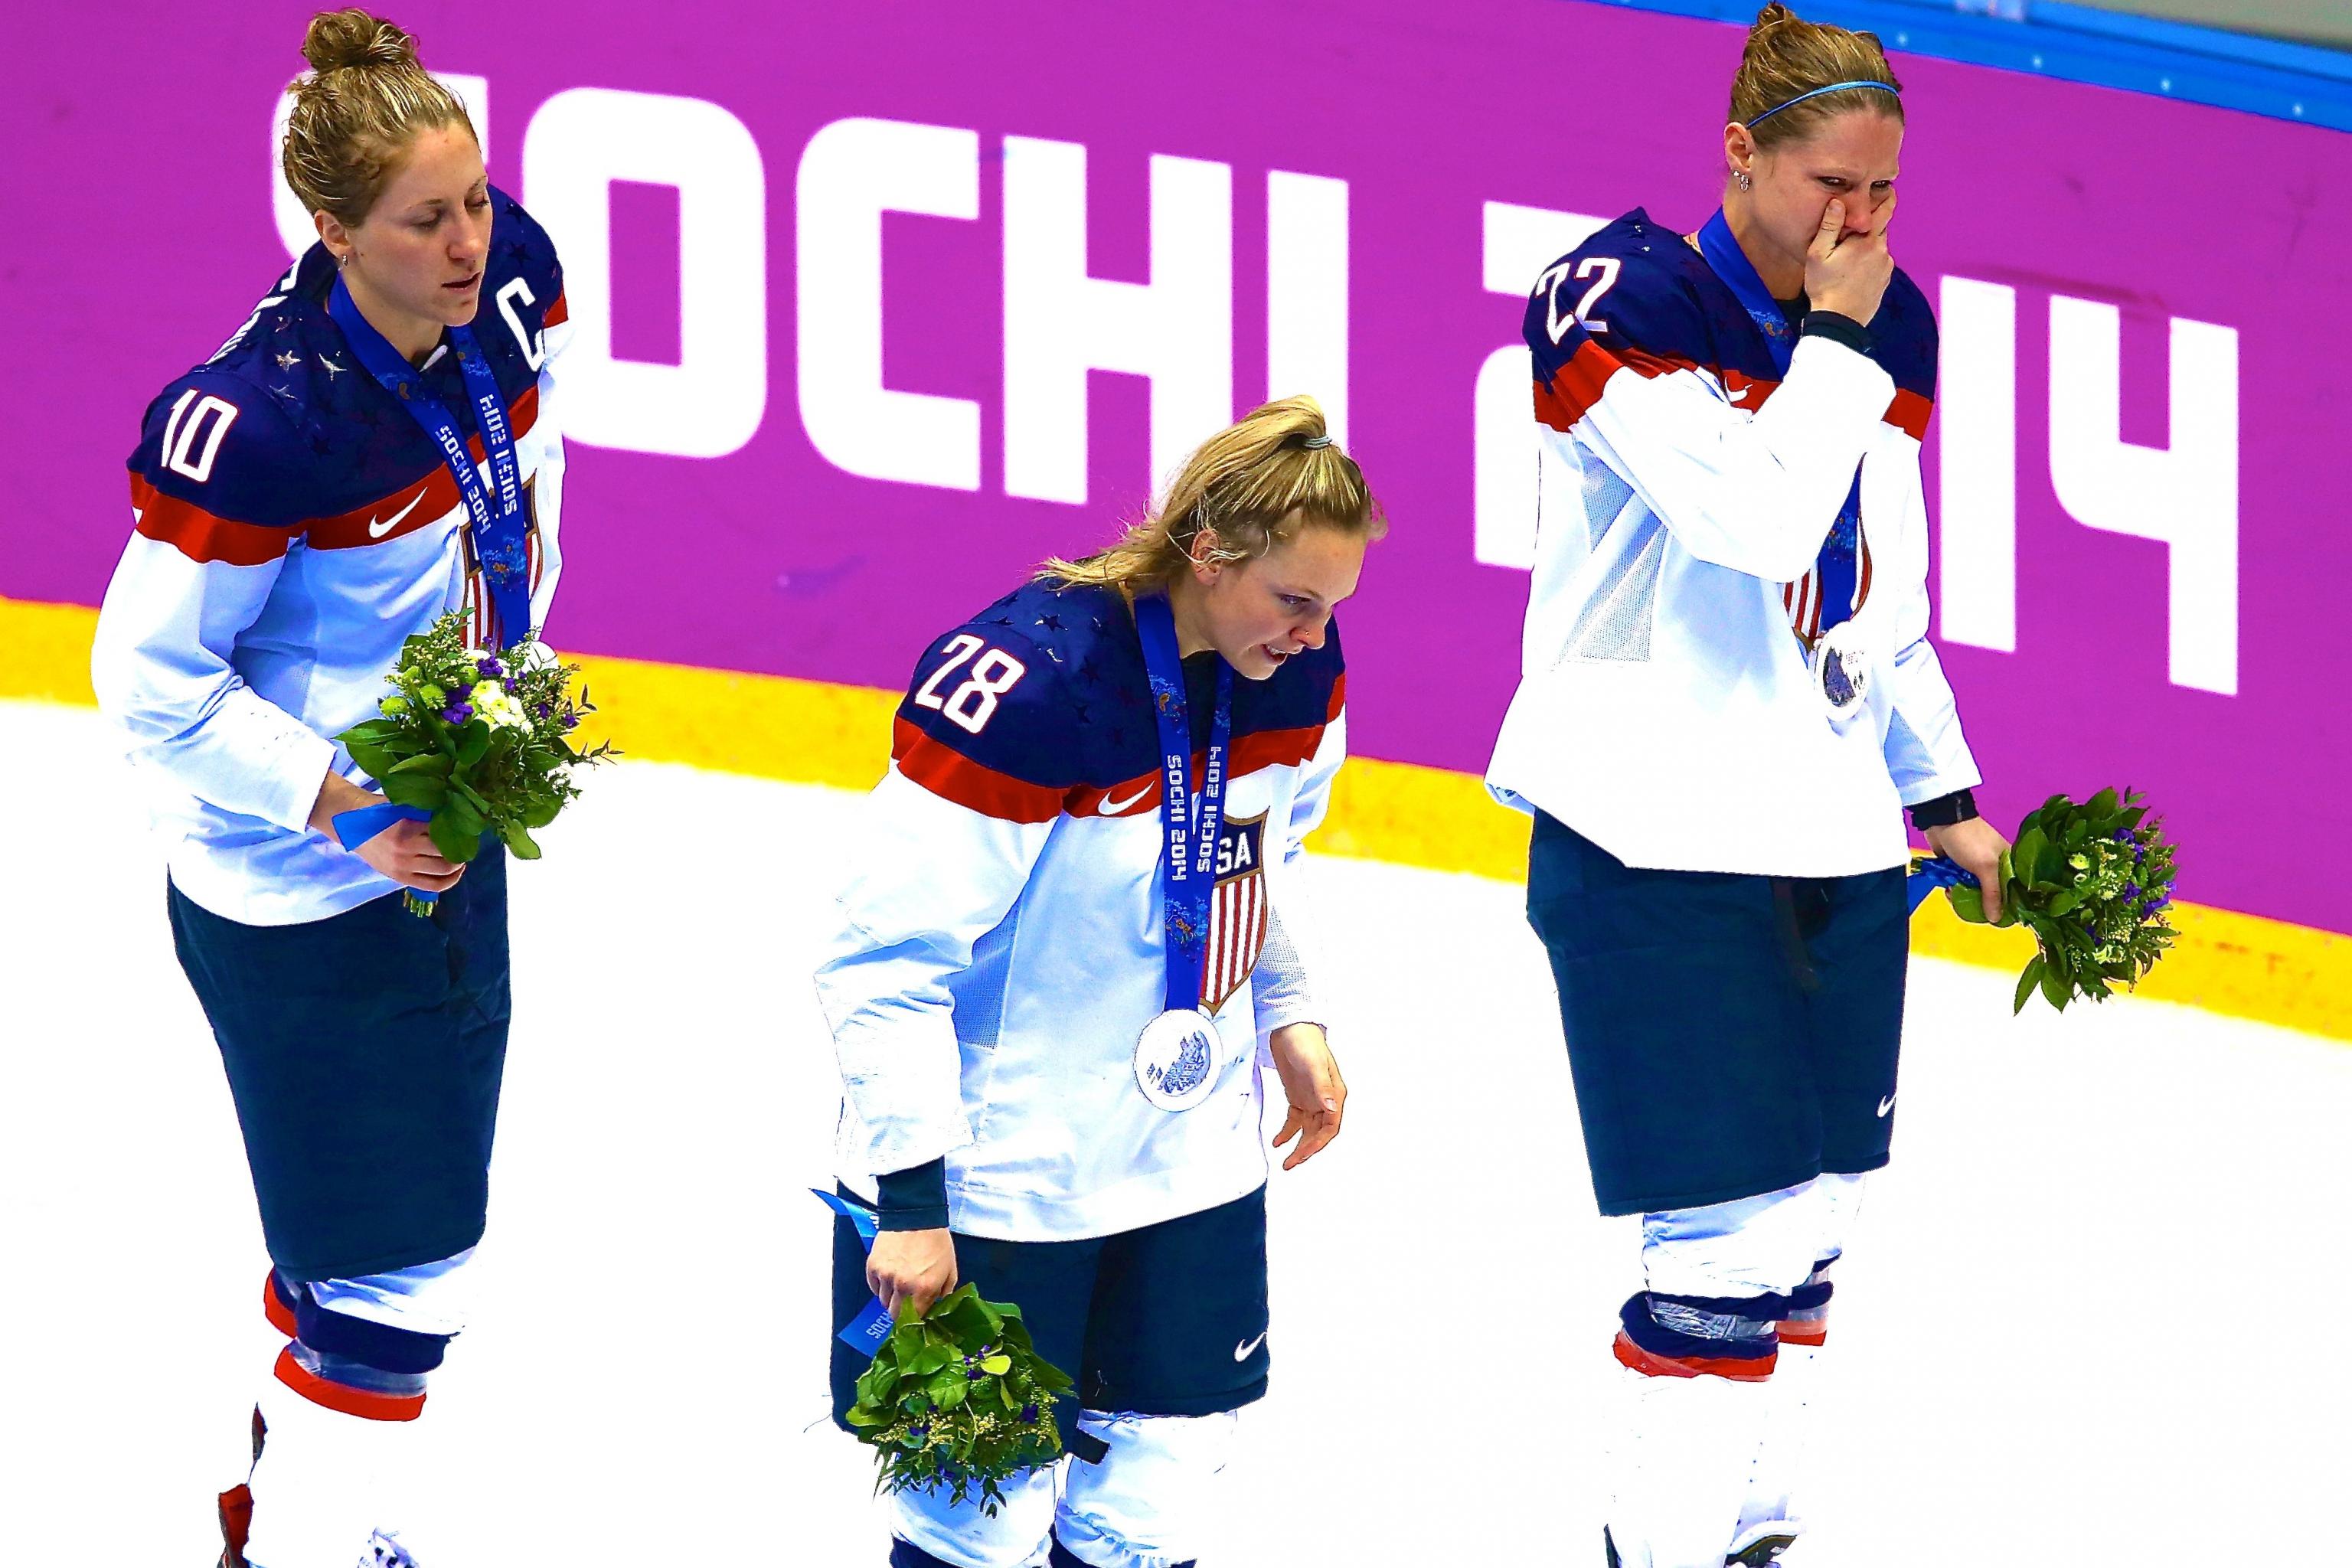 Us Women S Hockey Let Gold Slip Away In Gut Wrenching Loss To Rival Canada Bleacher Report Latest News Videos And Highlights